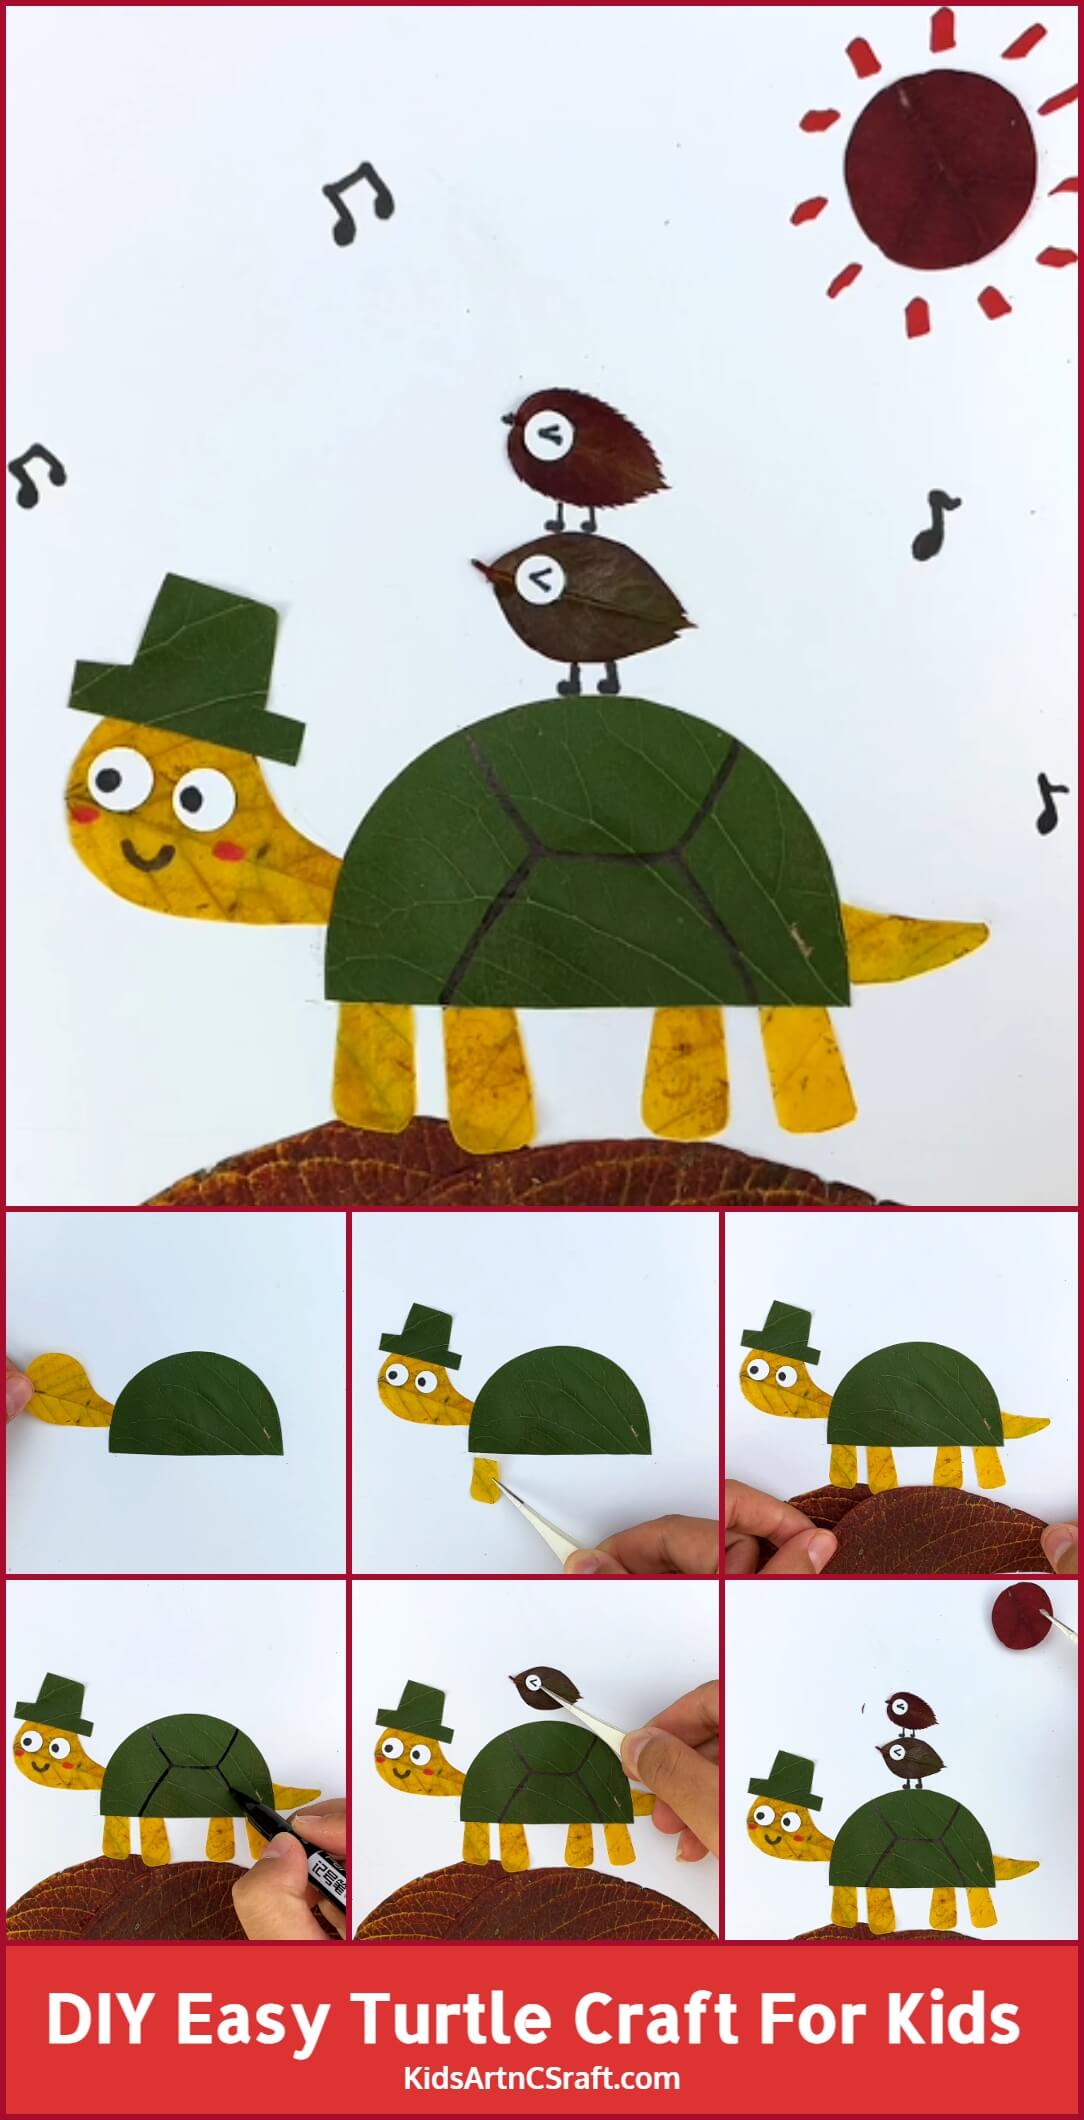 DIY Easy Turtle Craft for Kids to Make -Step by step tutorial